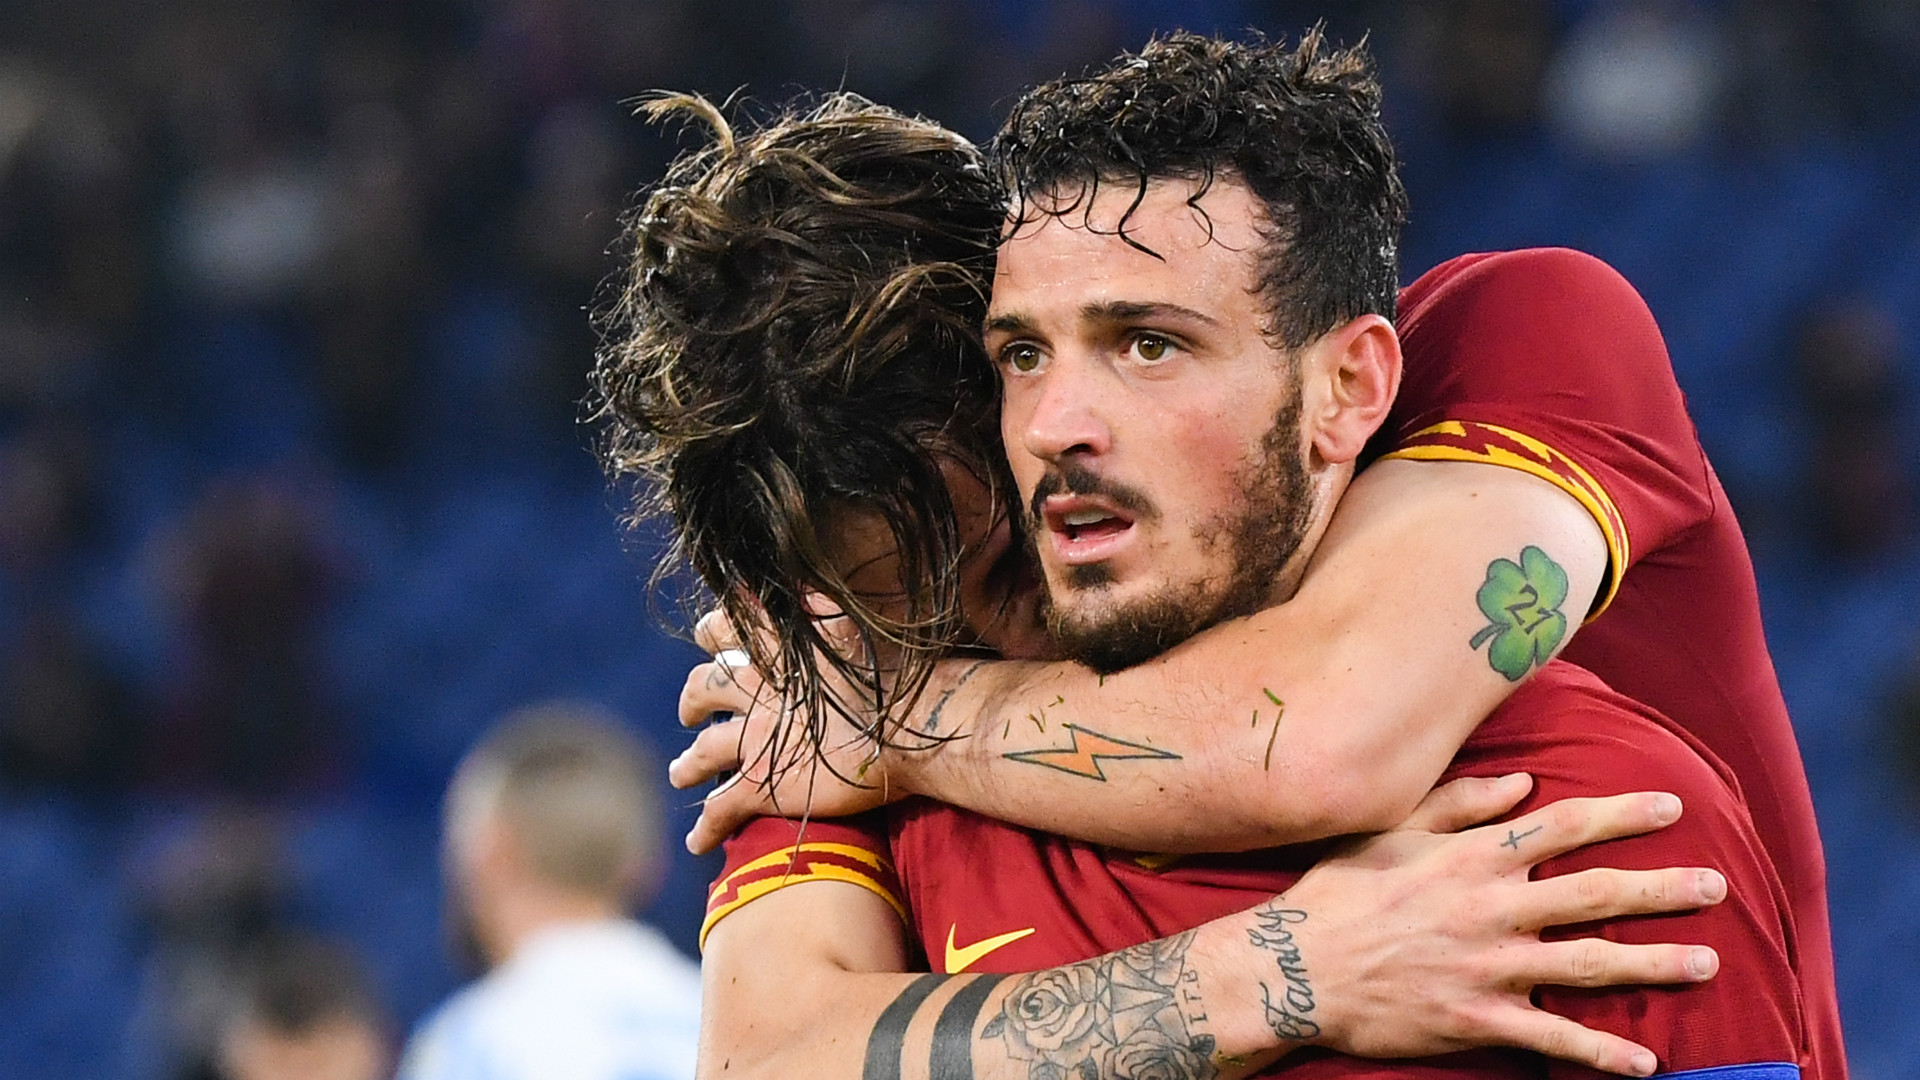 Born and raised in Rome, and a Giallorossi fan since his birth, Alessandro Florenzi seemed to be the perfect fit to become a long-time captain of the Roman Wolves